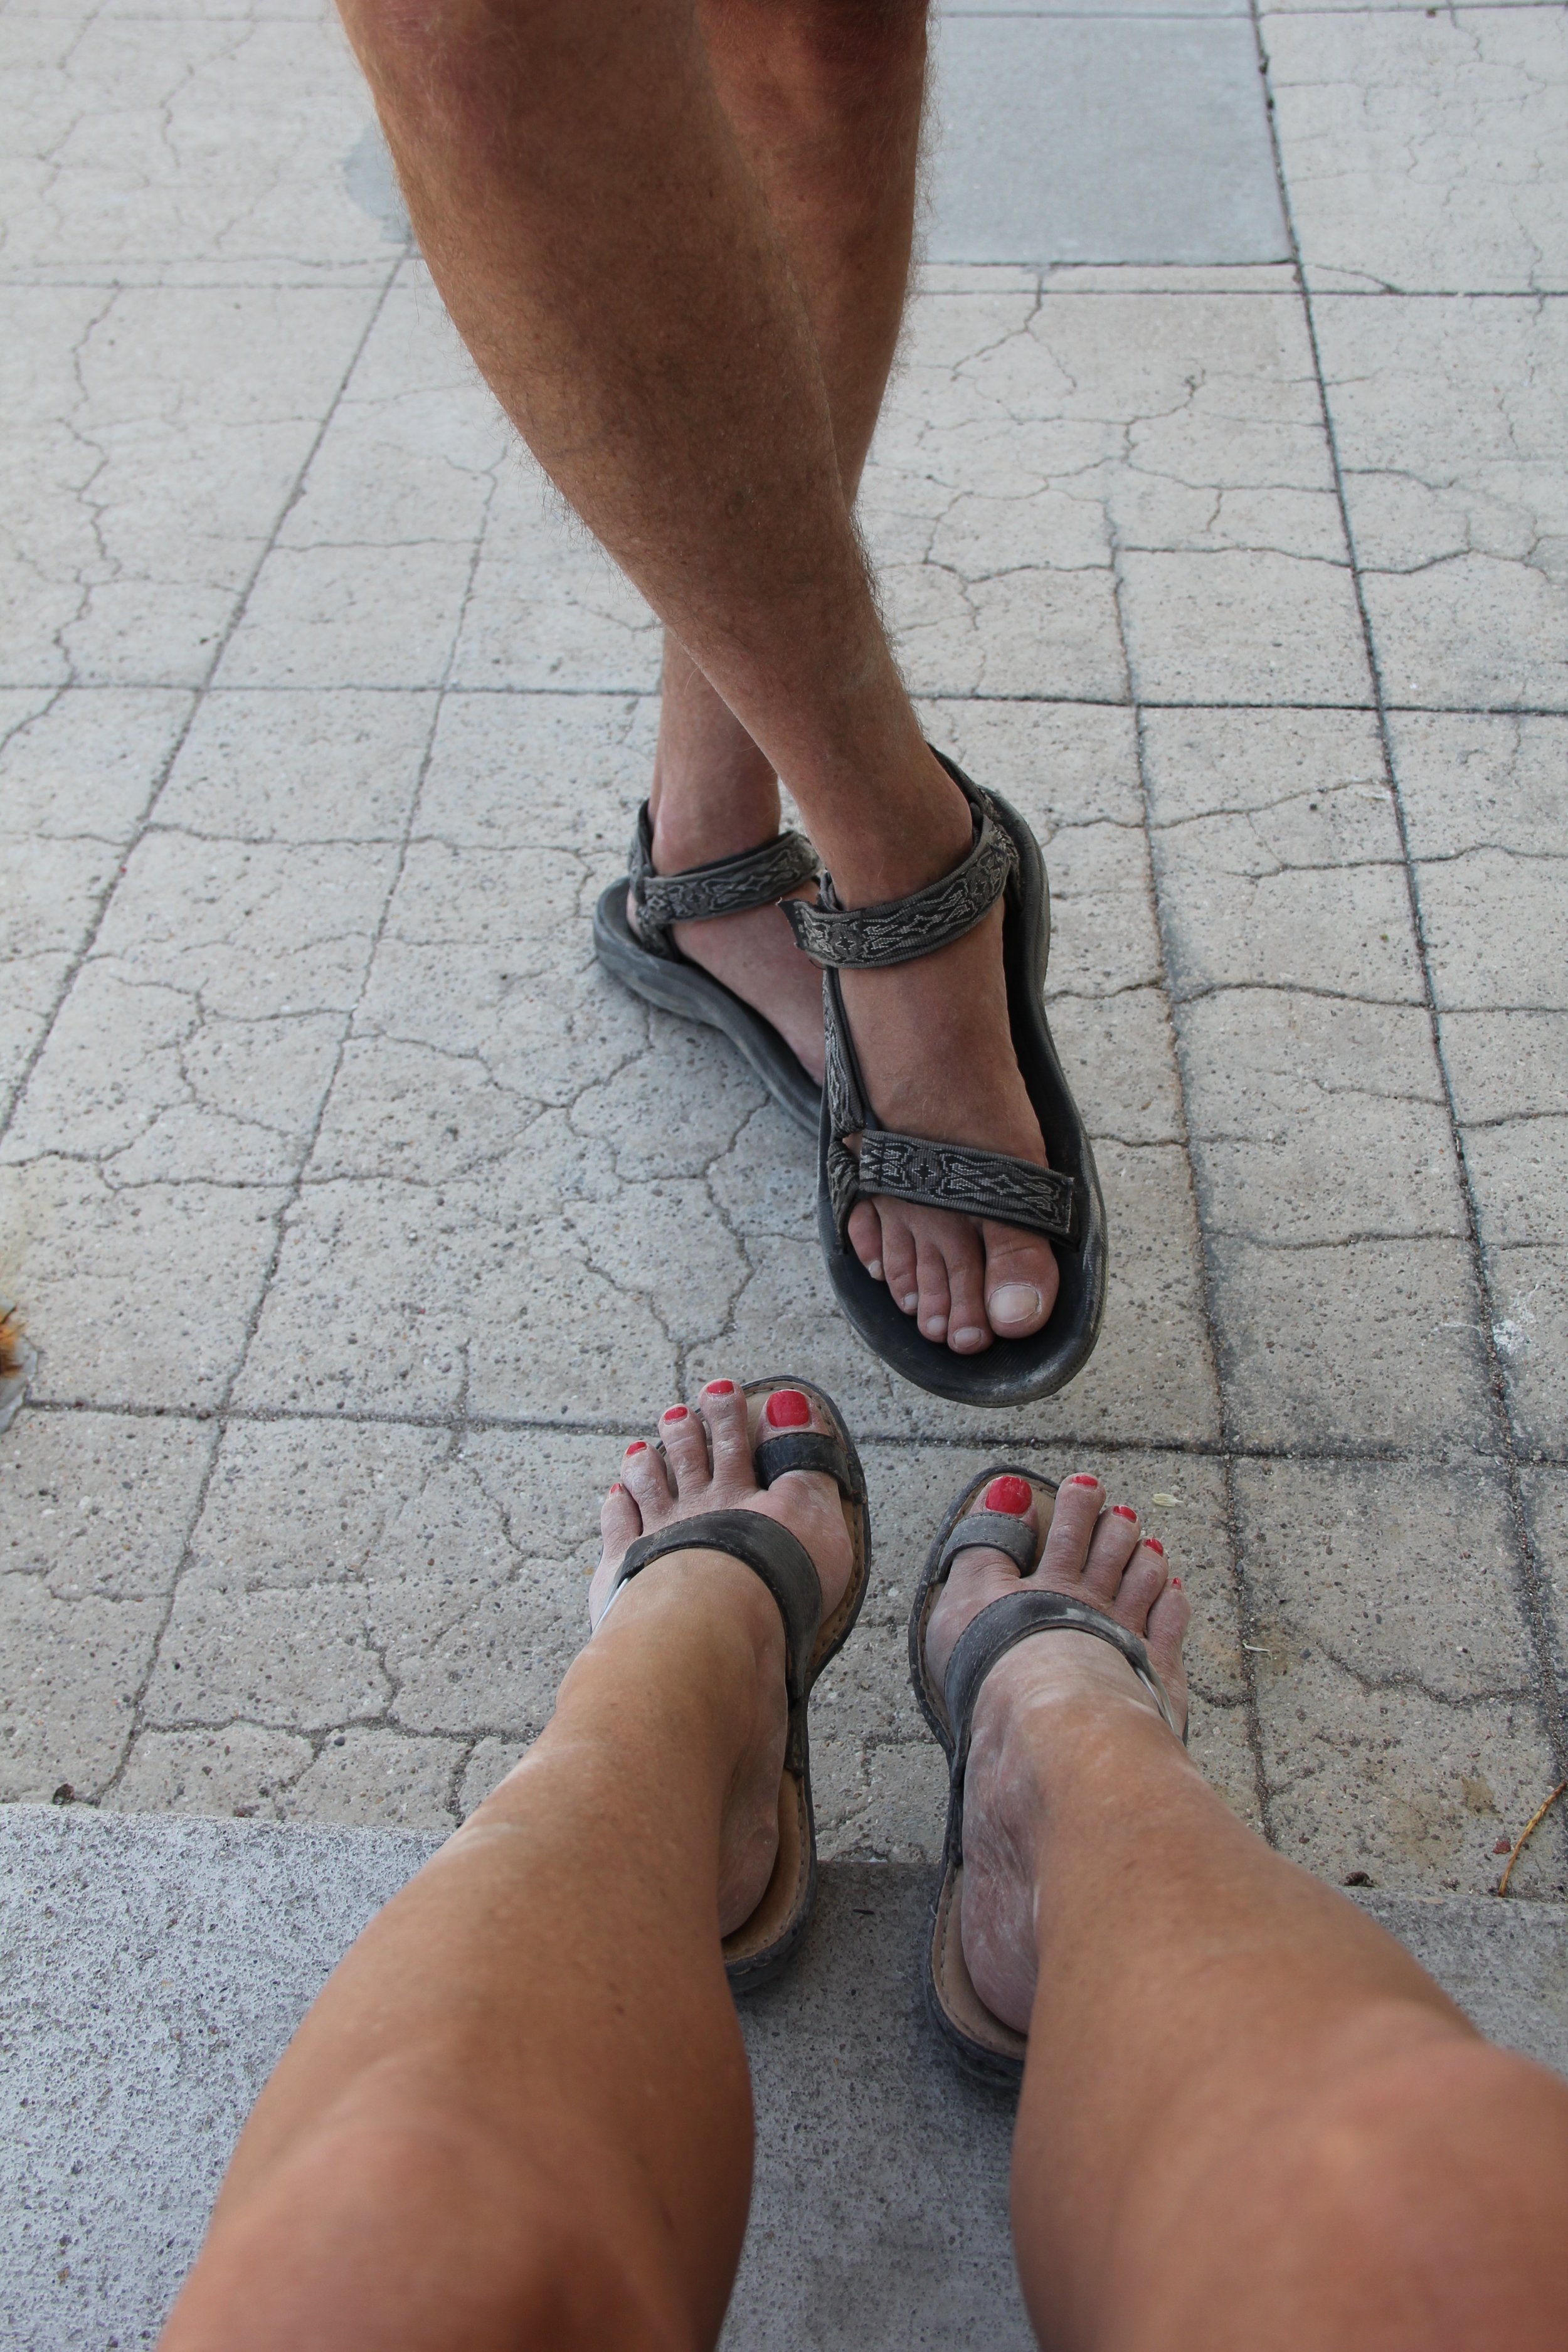 Miners Feet (My Dad Still Can't Believe I Mine In Sandals! 